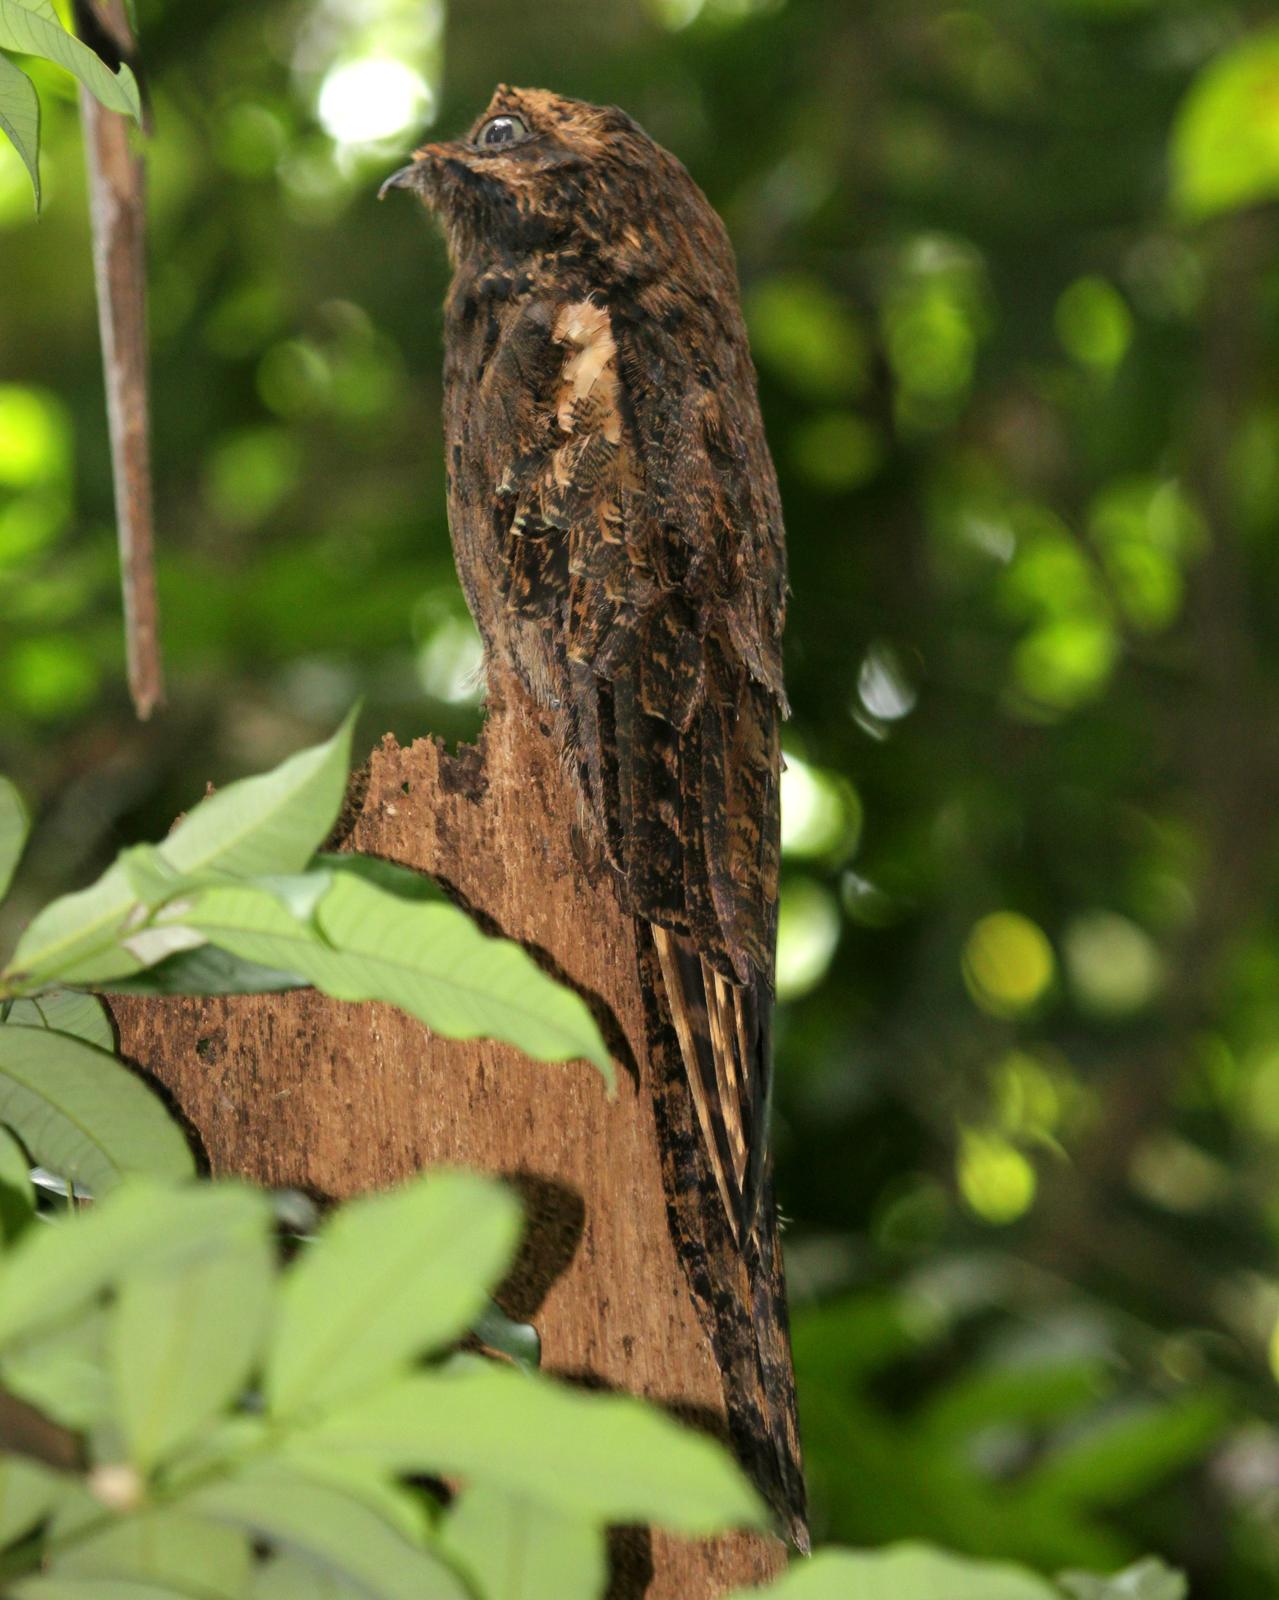 Long-tailed Potoo Photo by Mark Scheuerman